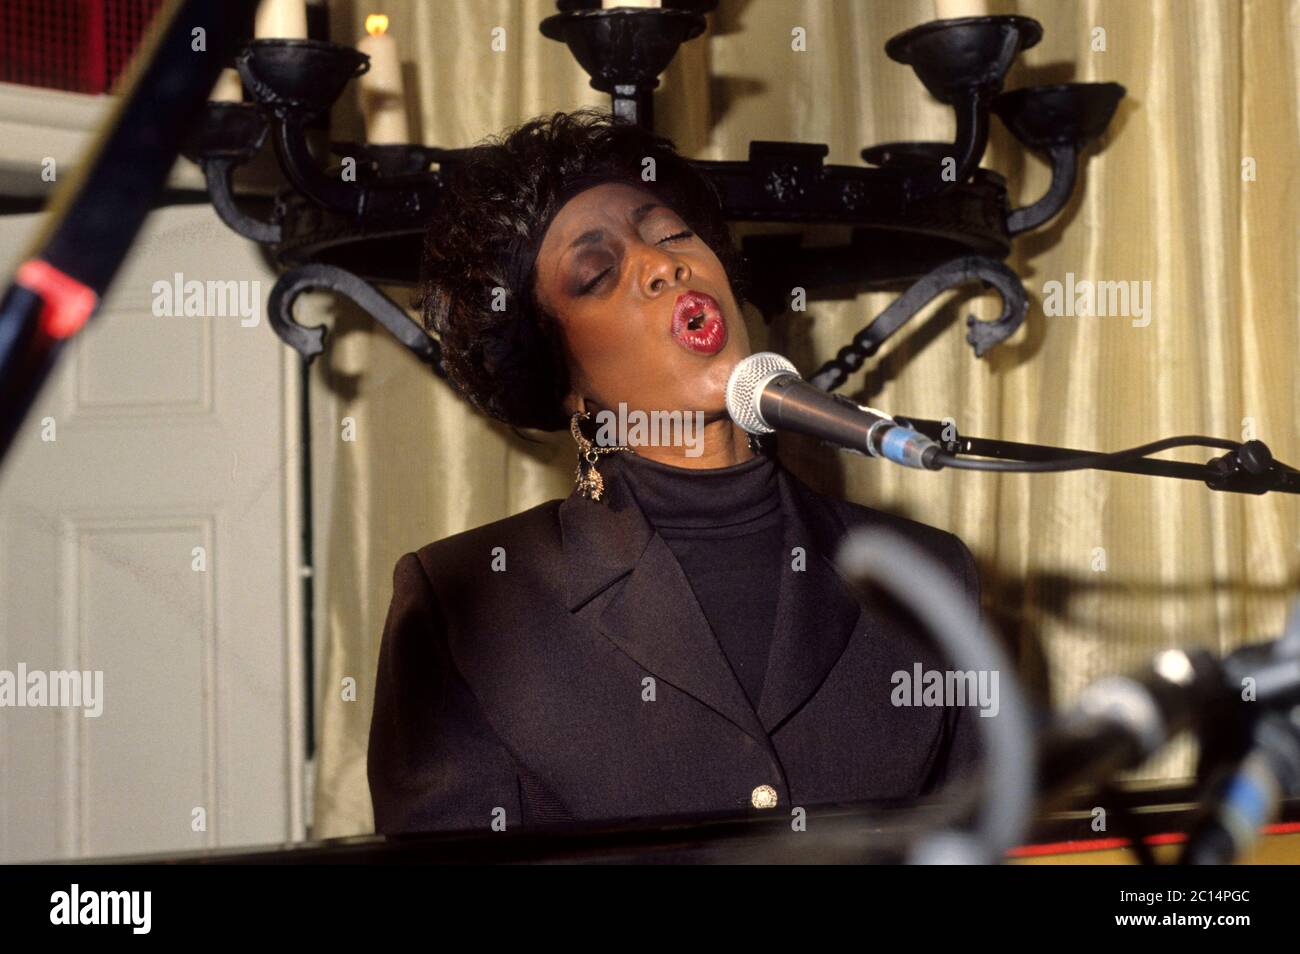 Oleta Adams at a showcase in Searcy's Bar. London, October 23, 1991 | usage worldwide Stock Photo